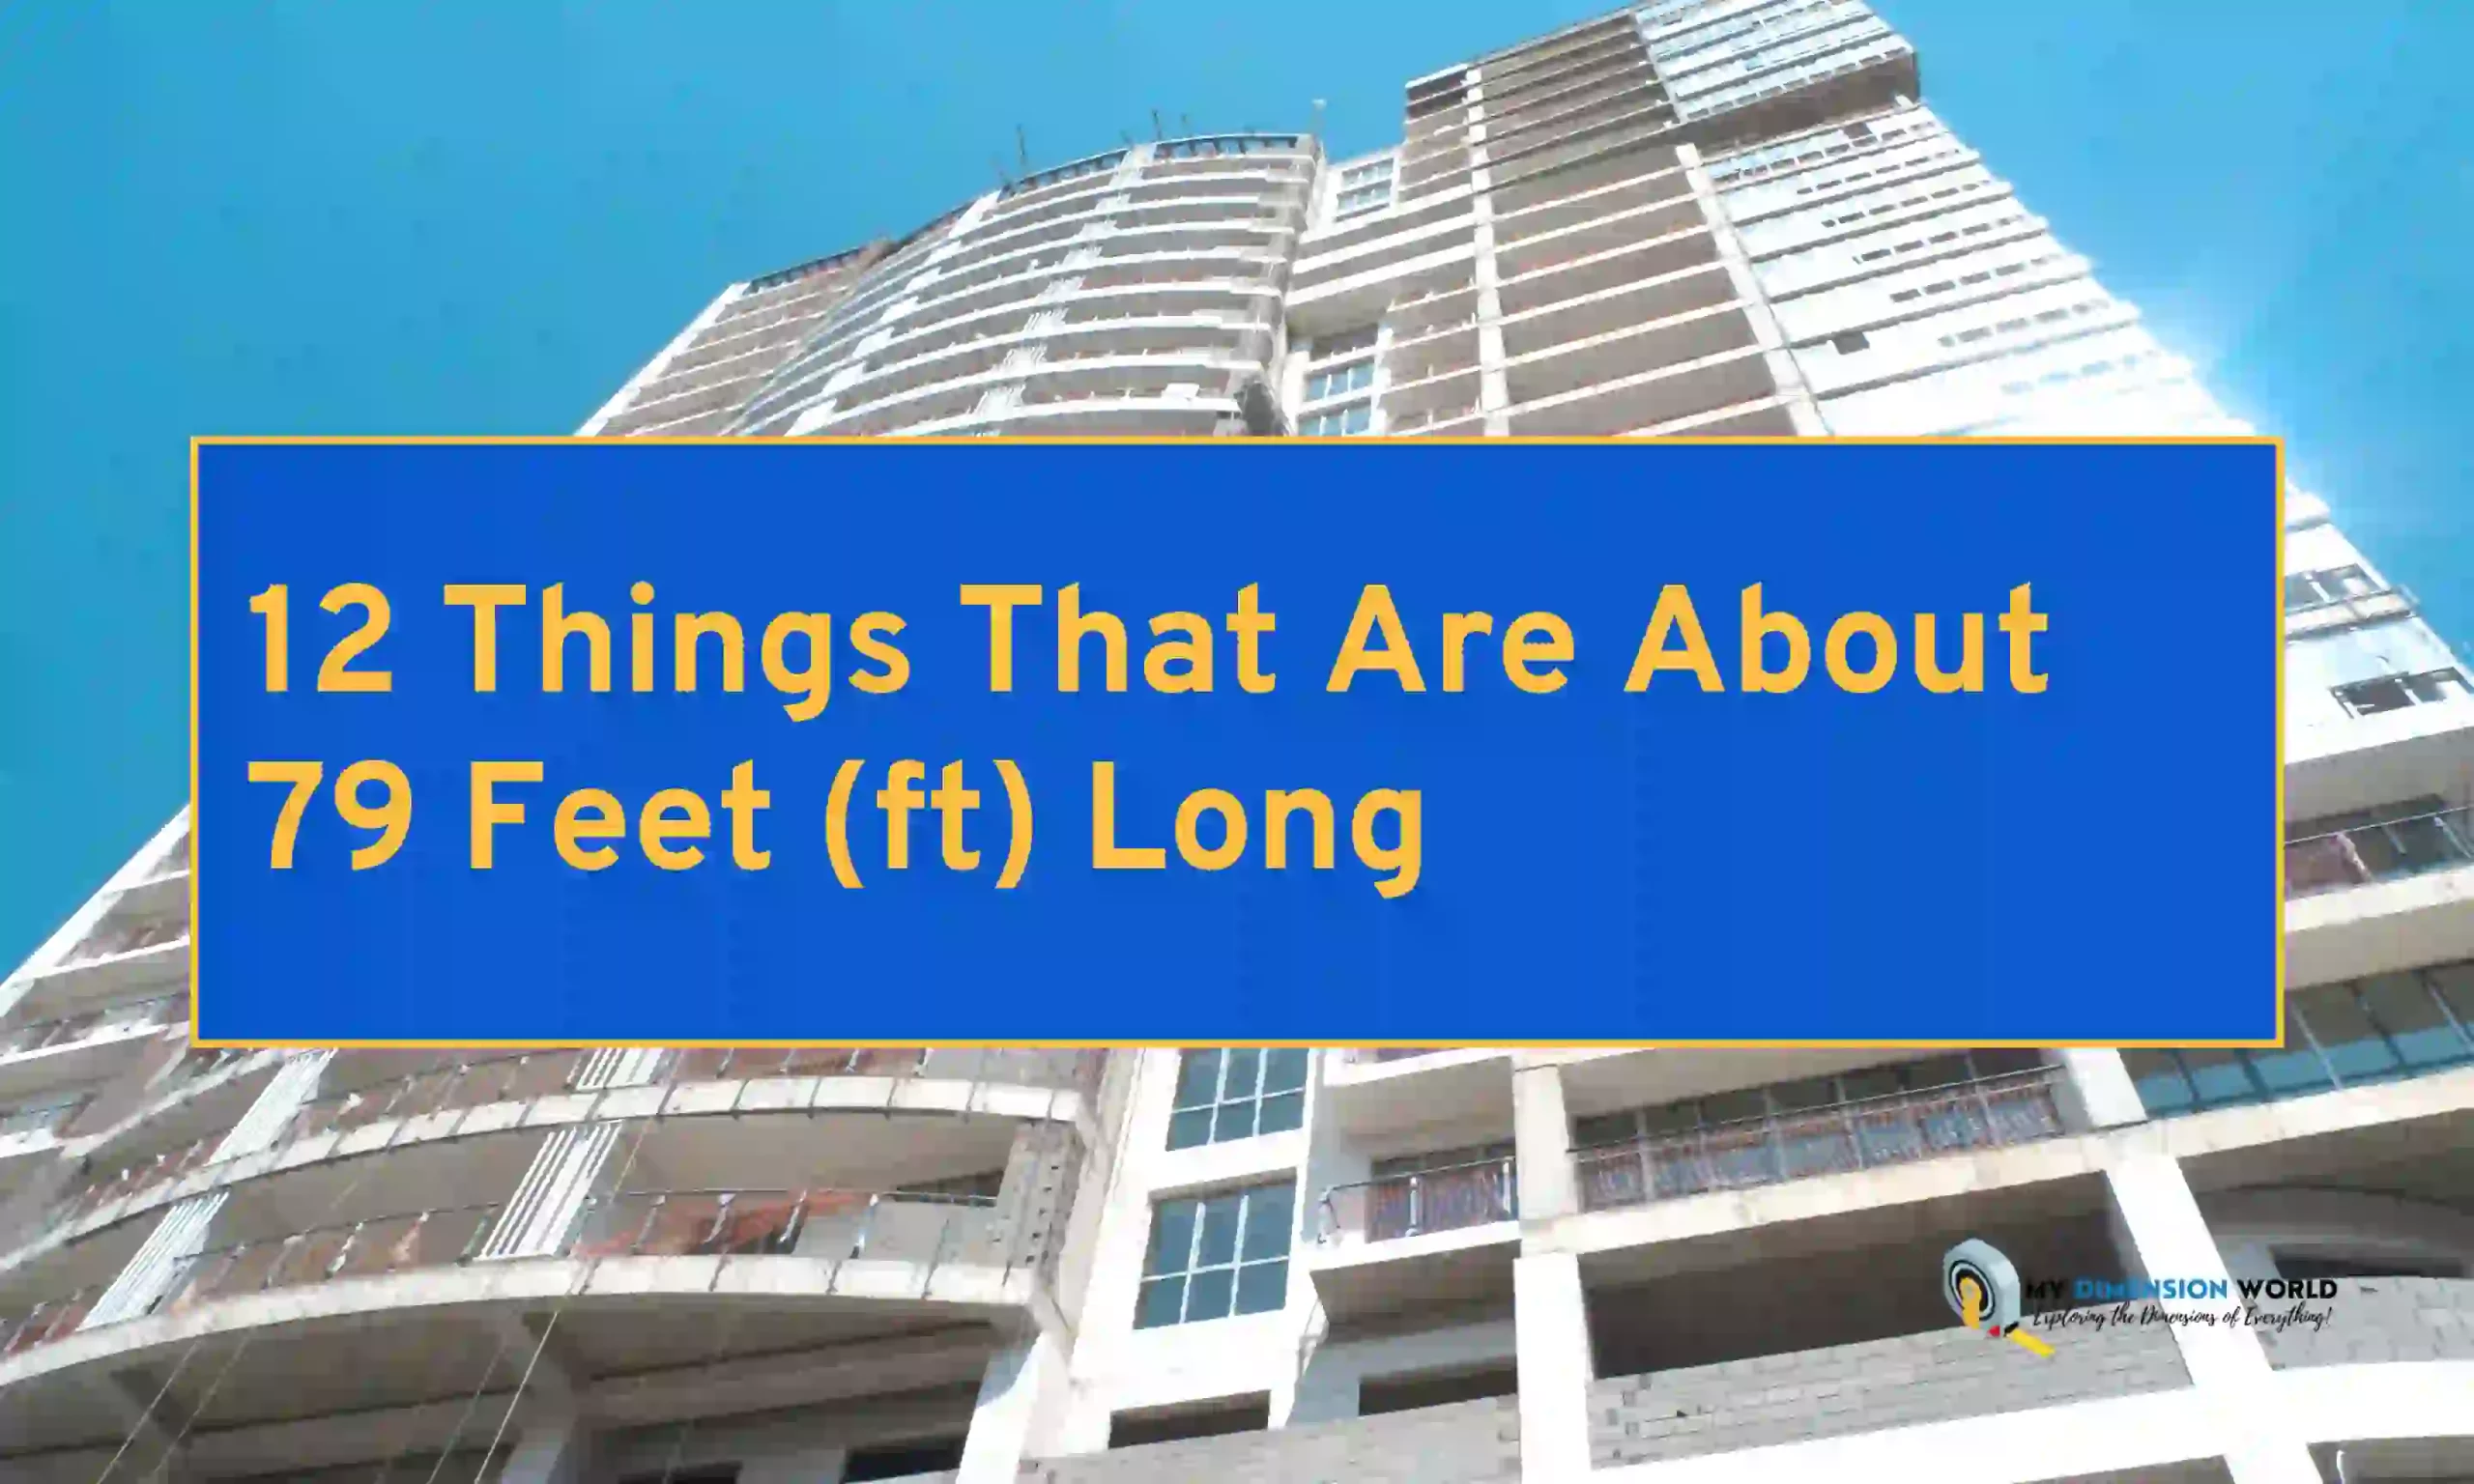 12 Things That Are About 79 Feet (ft) Long